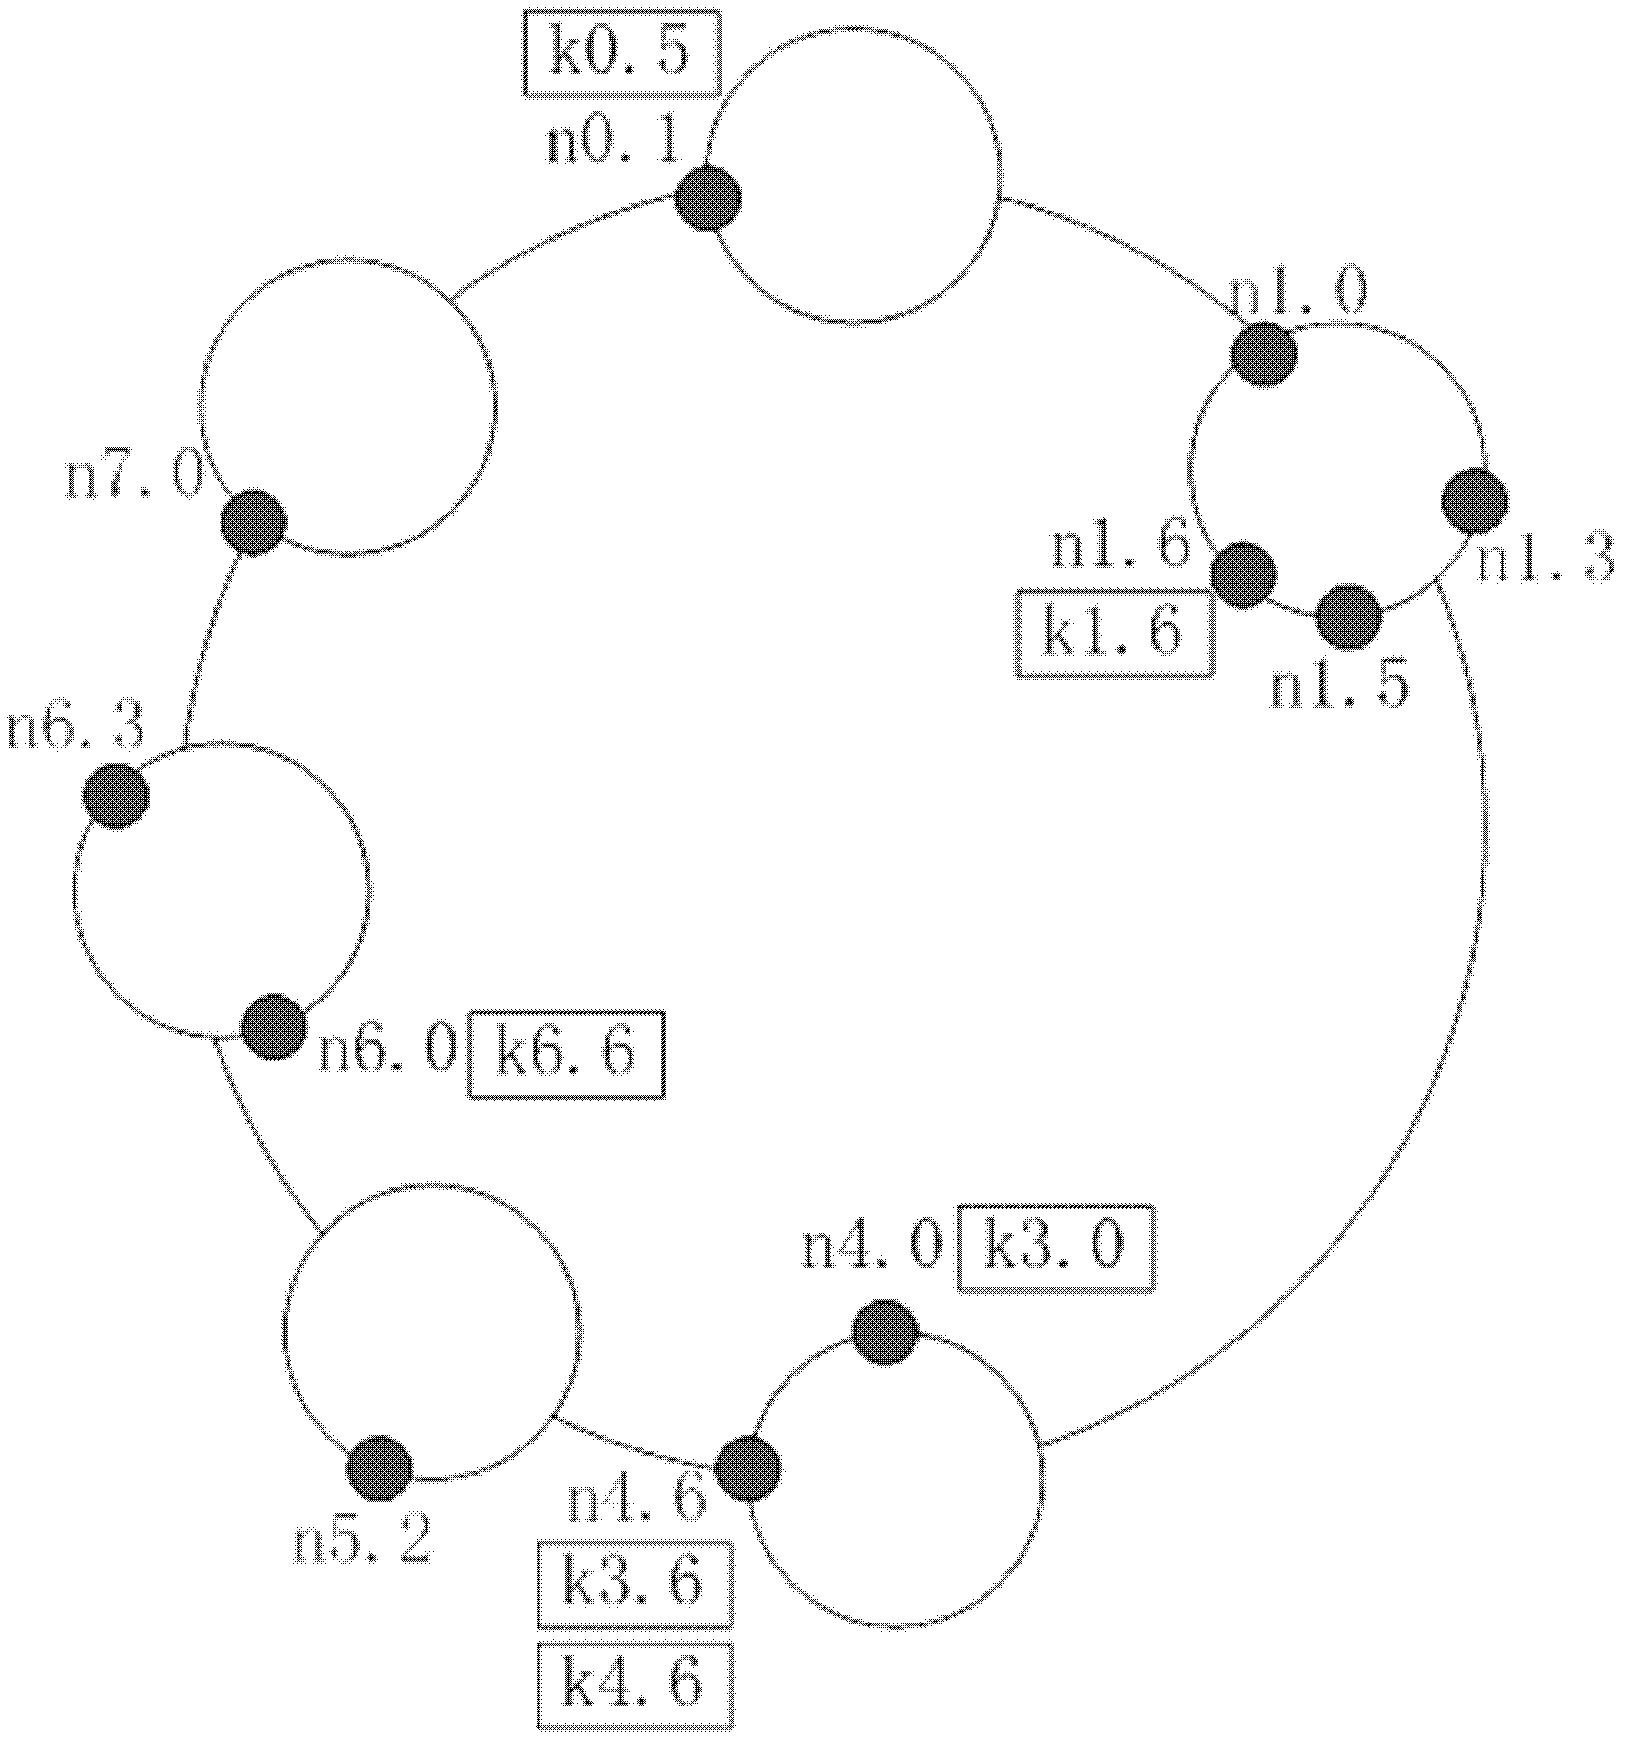 Routing system constructing method in structuralized P2P (peer-to-peer) network